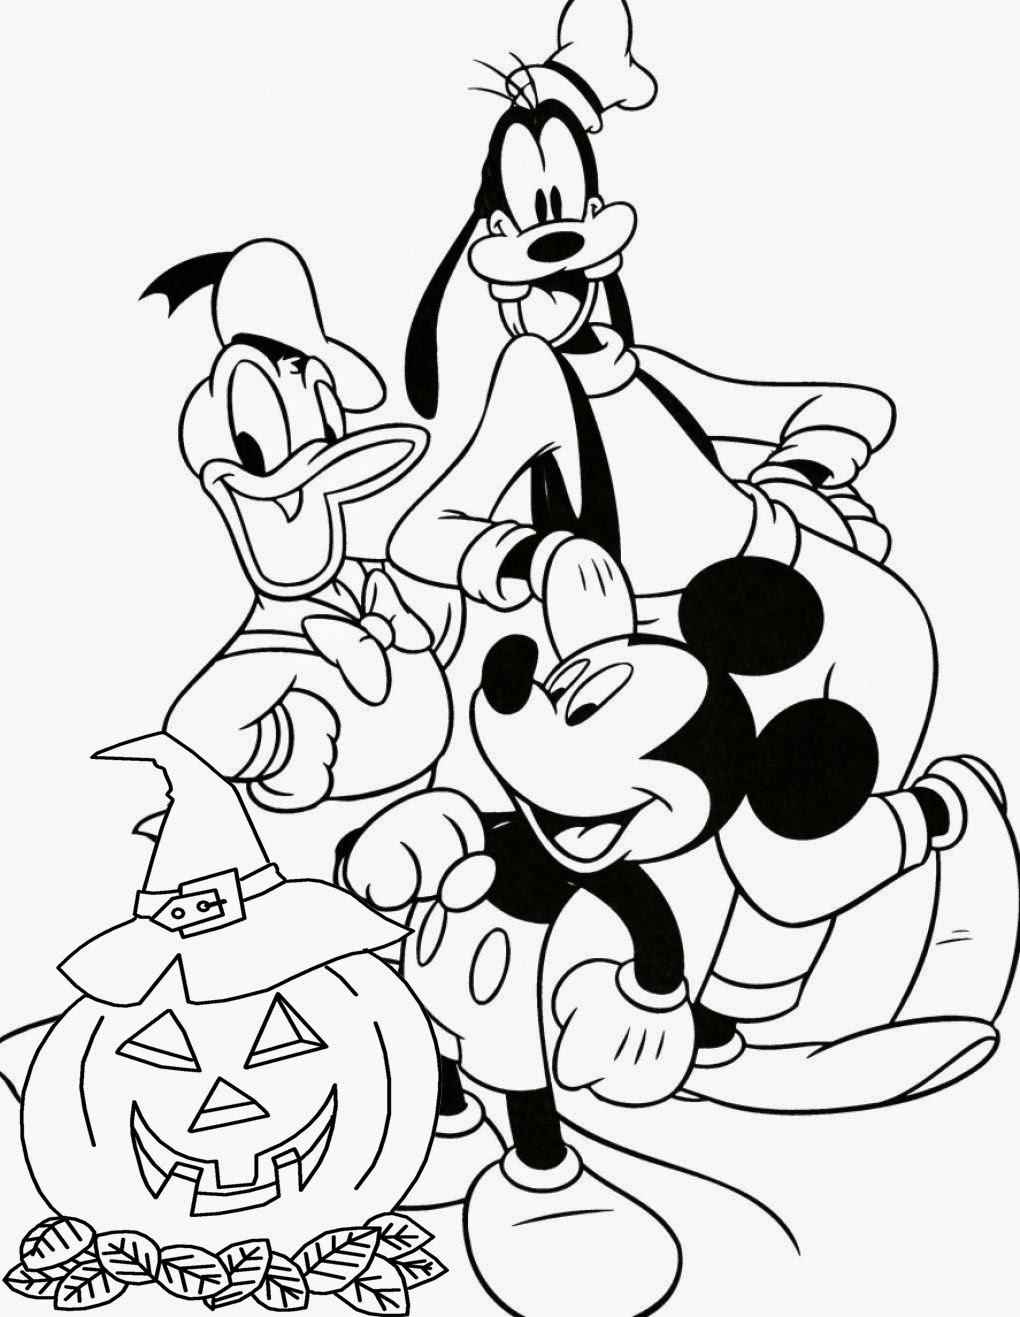 hallaween coloring pages - photo #31